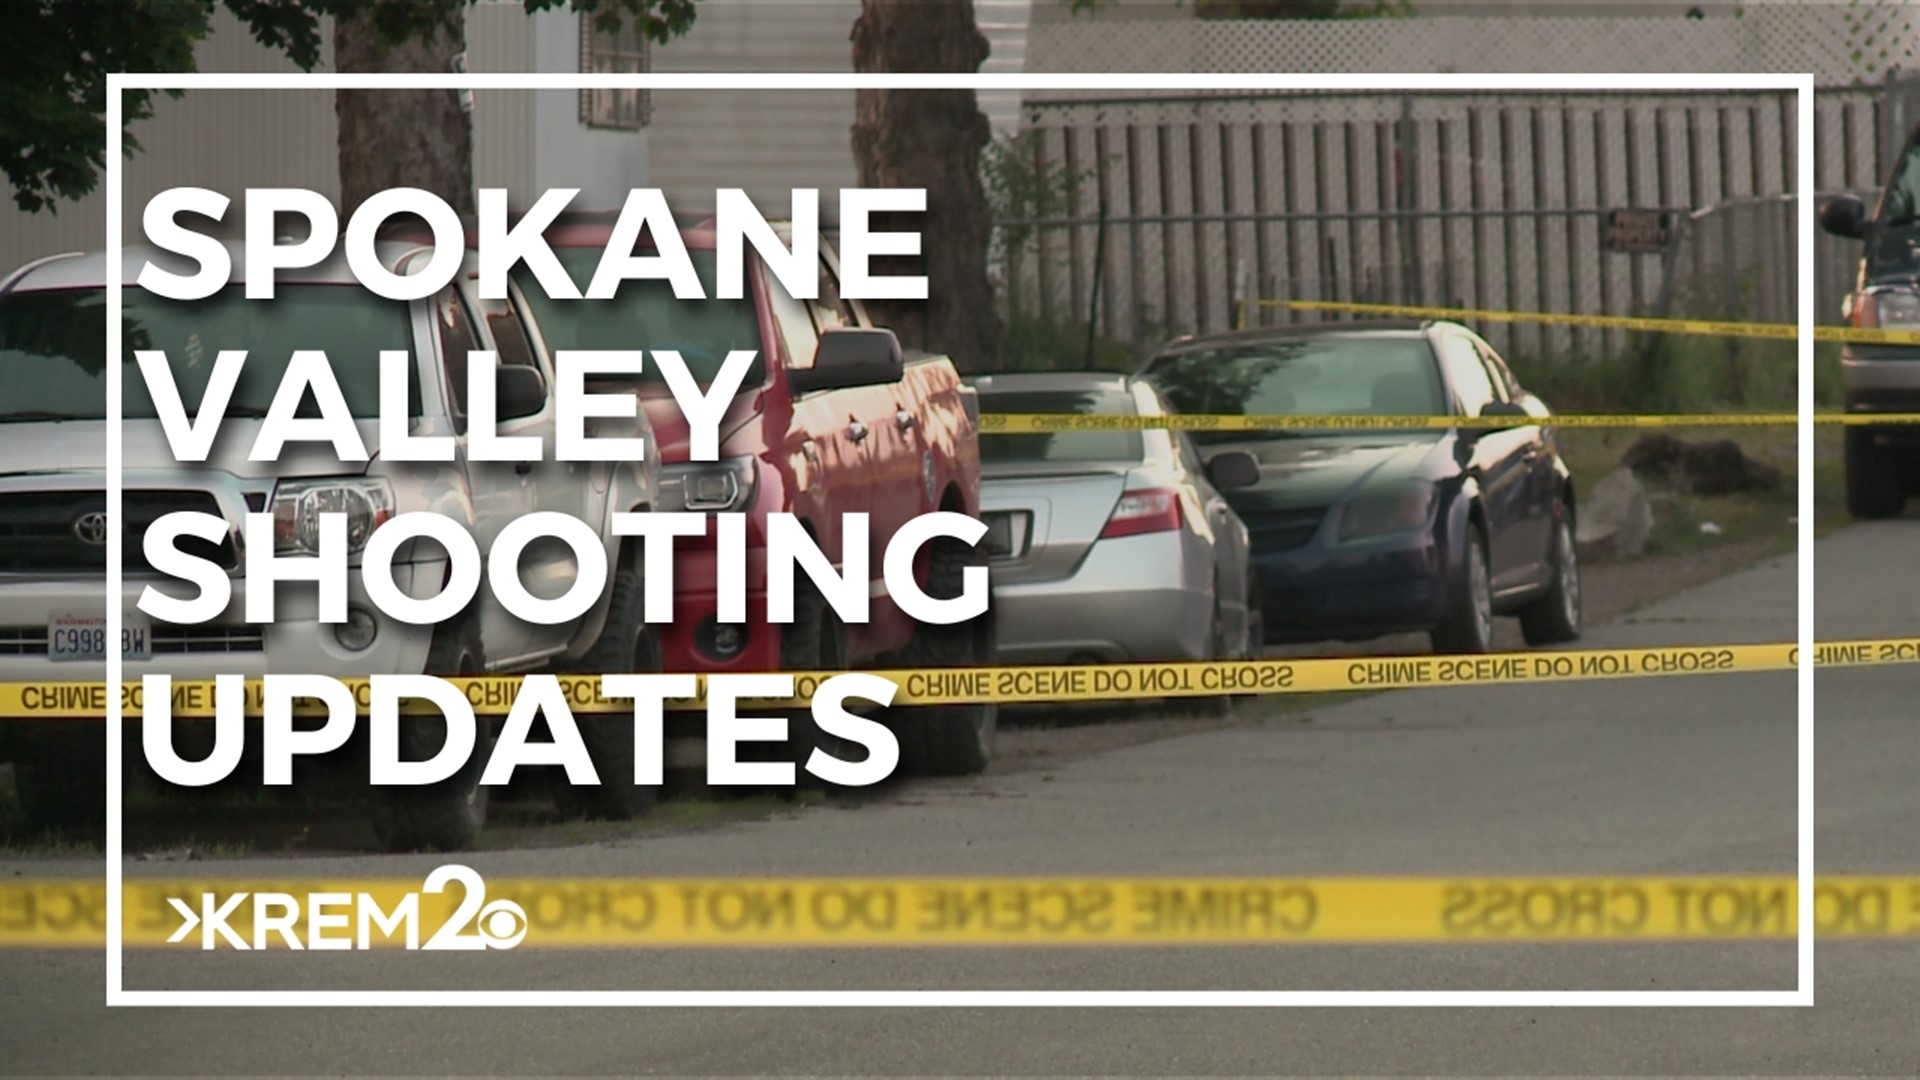 KREM 2's Shannon Moudy breaks down the latest on the shooting and reveals this isn't the first time a shooting has occurred at 2nd Avenue and Havana.